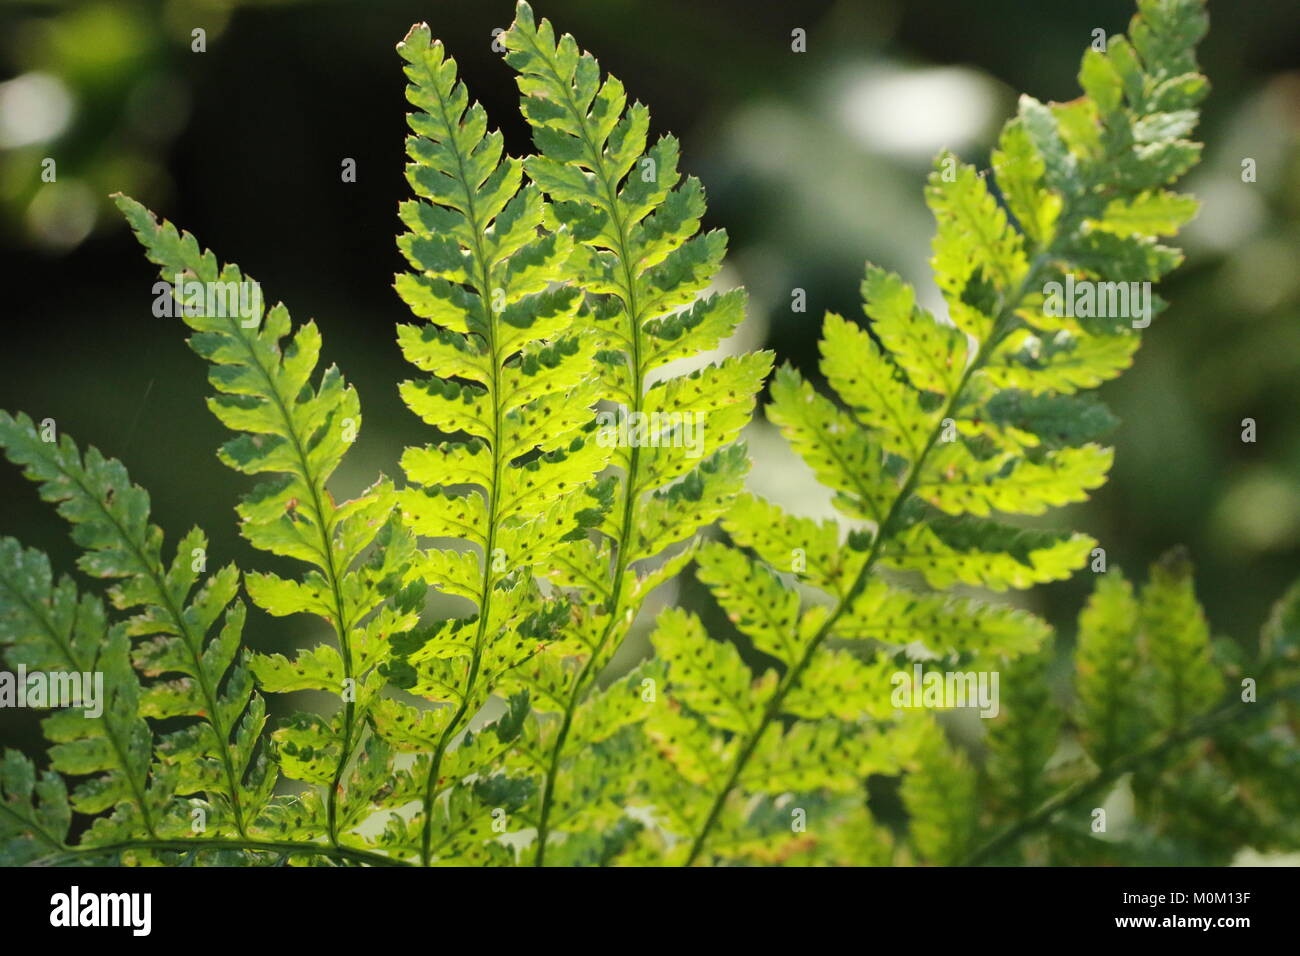 Fern leaves in the sunlight Stock Photo